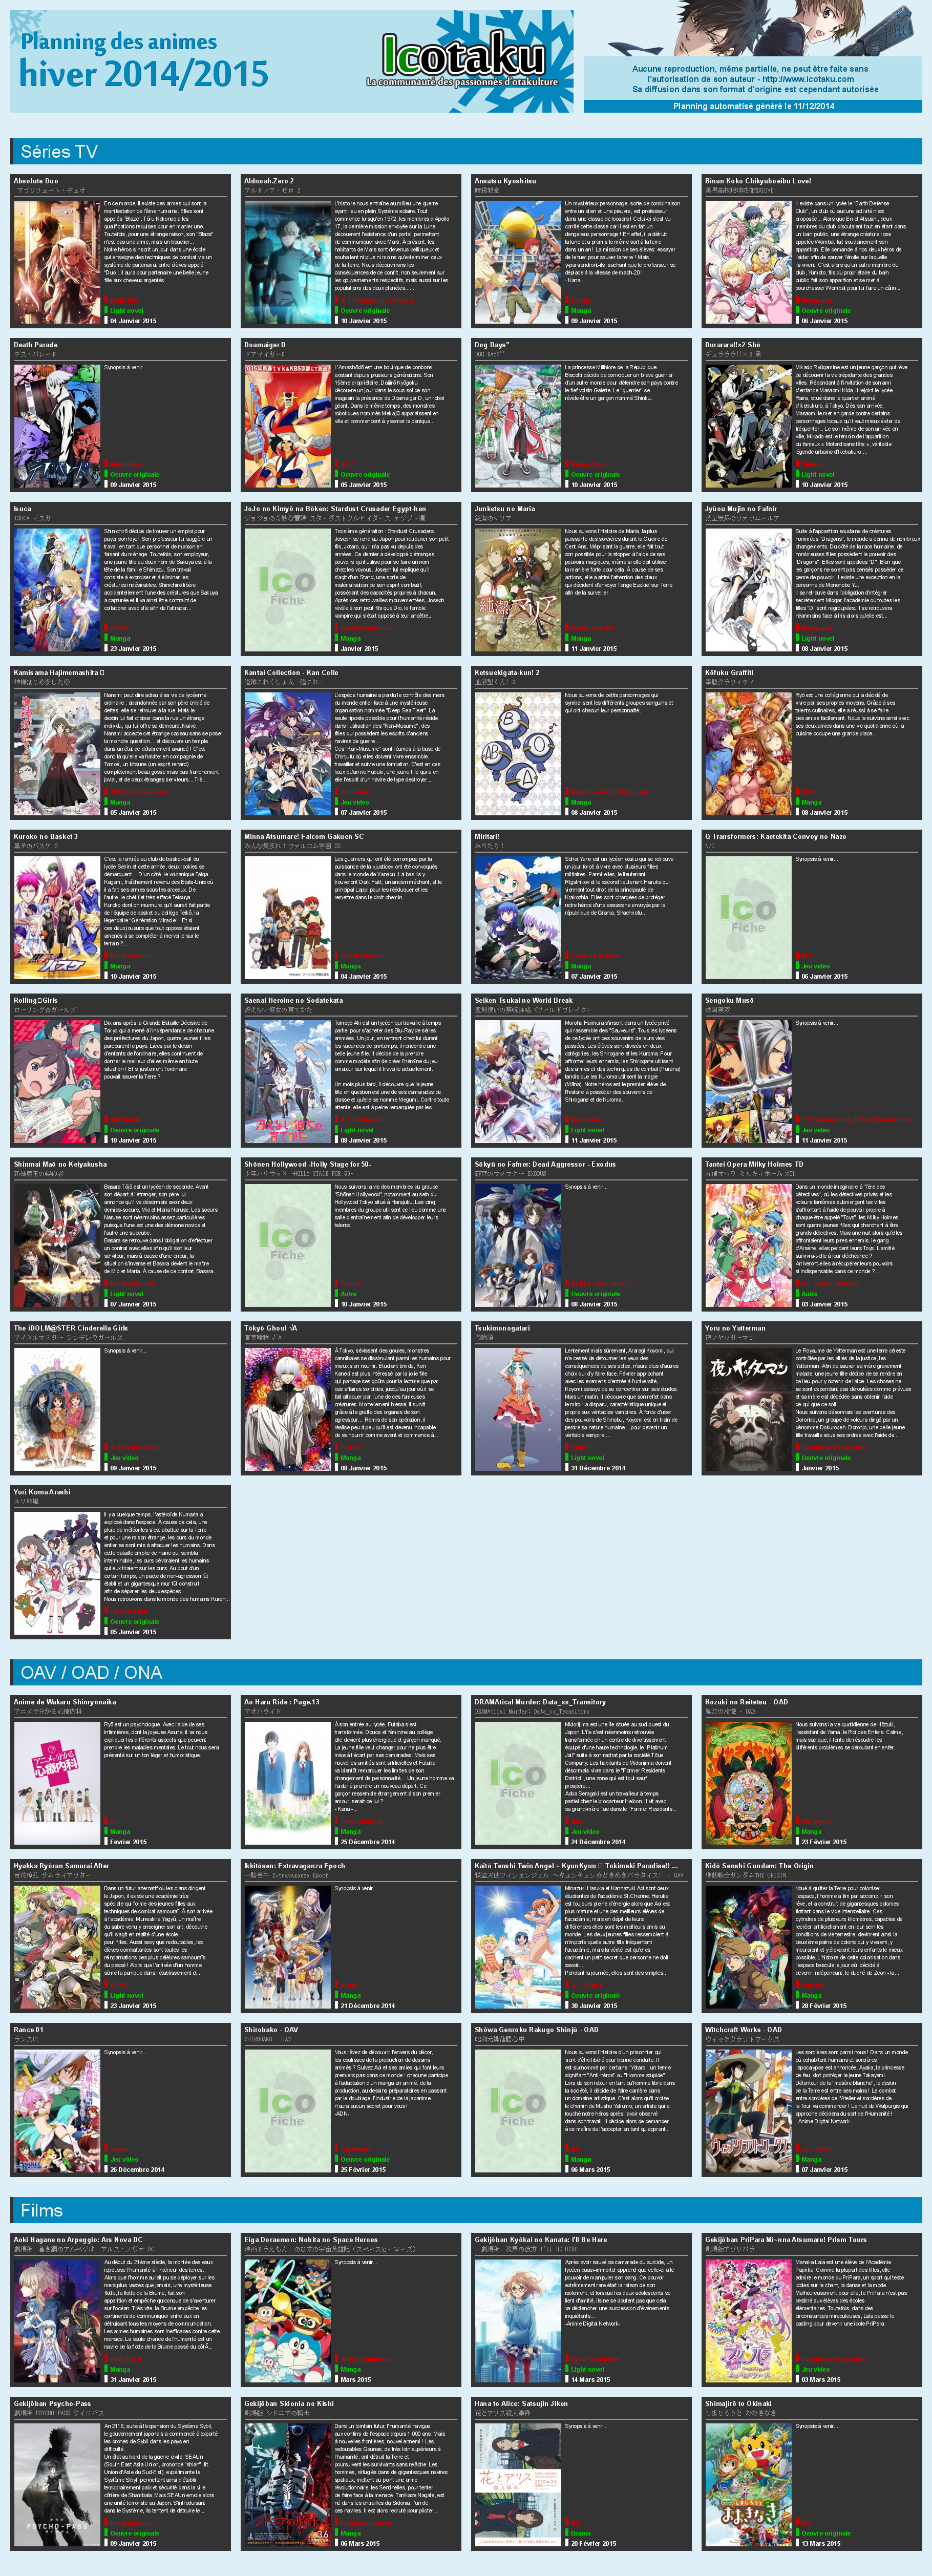 planning_anime_hiver_2014_2015